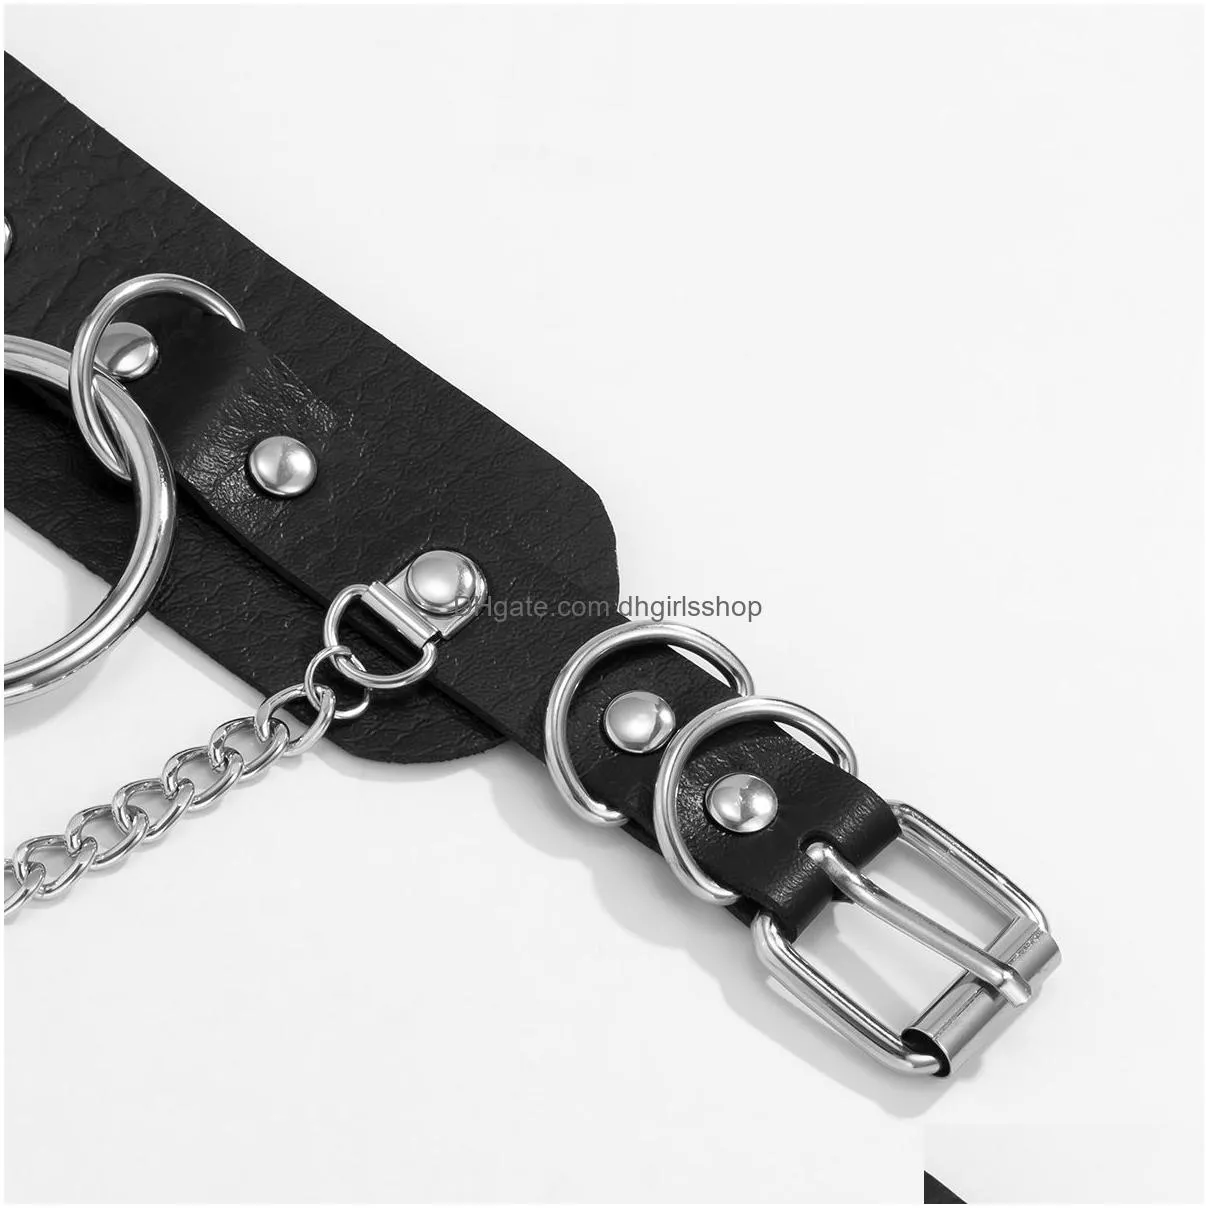 2022 new gothic punk leather necklace goth choker cross black thick collar bdsm for women spiked y2k grunge rock hip hop y fashion bijoux jewelry gifts